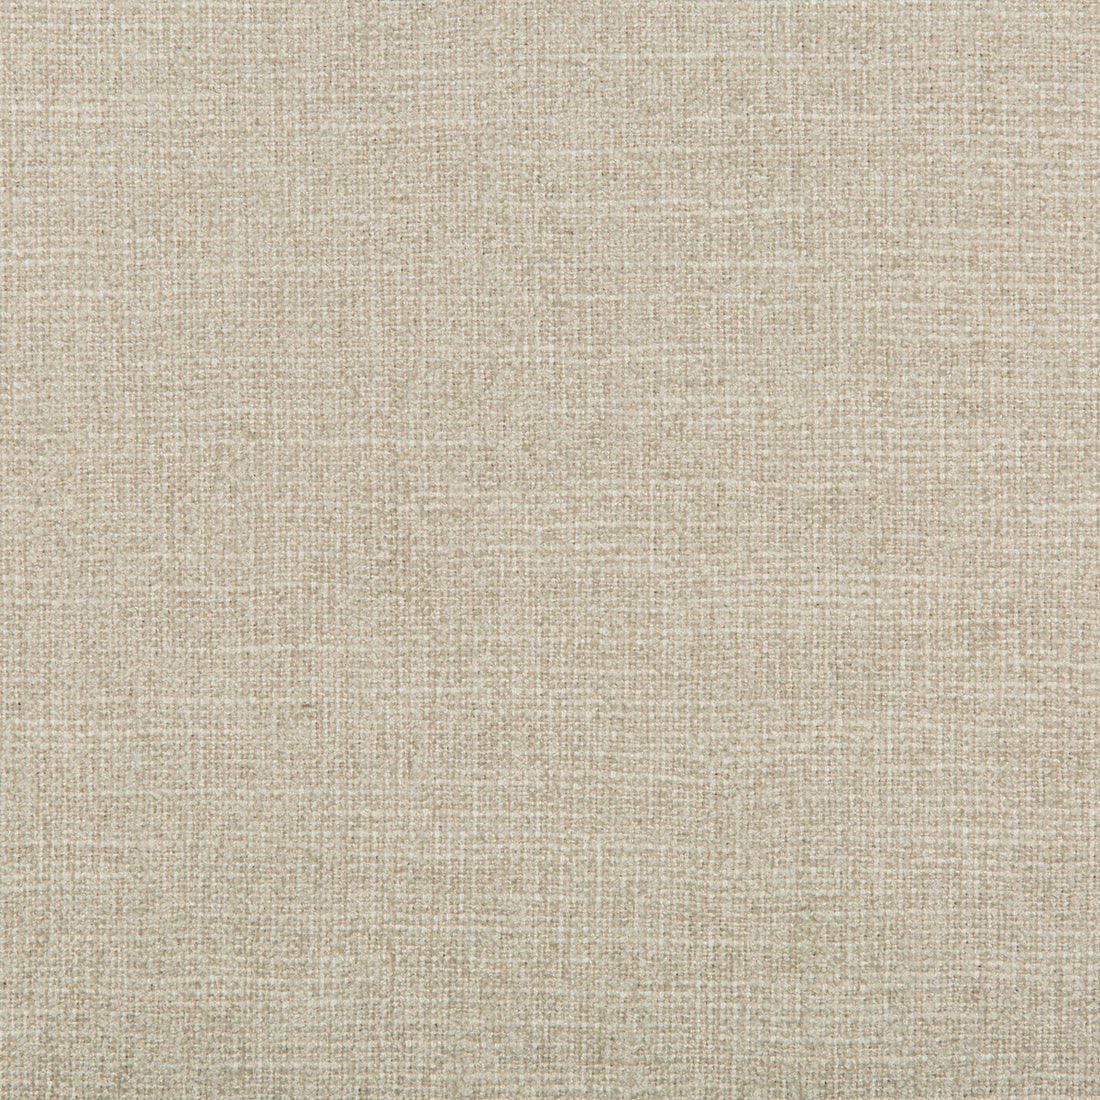 Adaptable fabric in quartz color - pattern 35397.11.0 - by Kravet Design in the Nate Berkus Well-Traveled collection